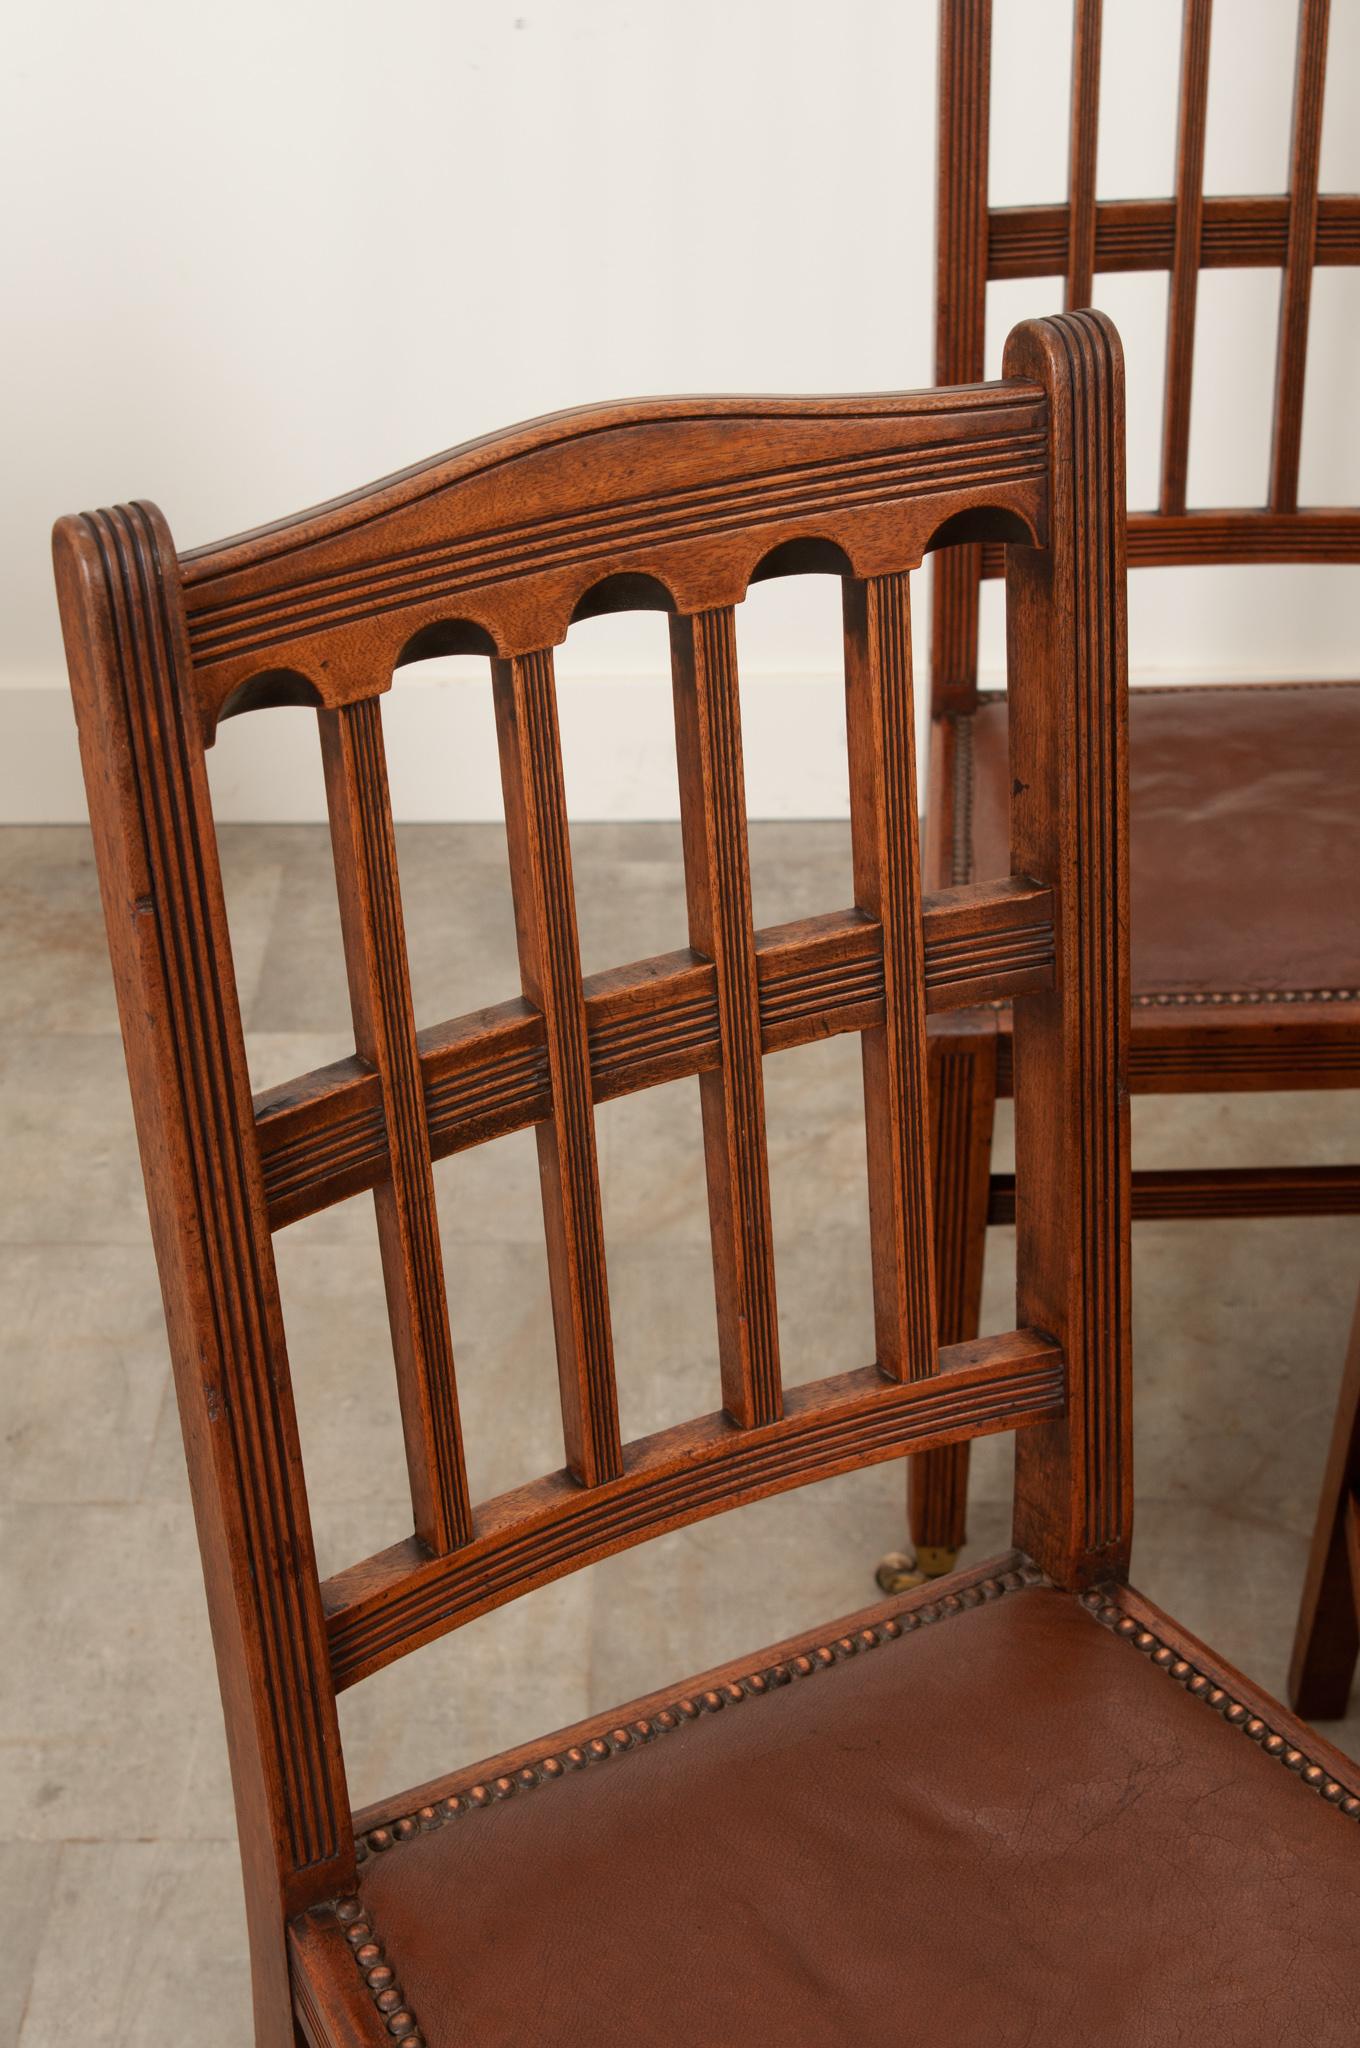 Set of 8 Arts & Crafts Dining Chairs In Good Condition For Sale In Baton Rouge, LA